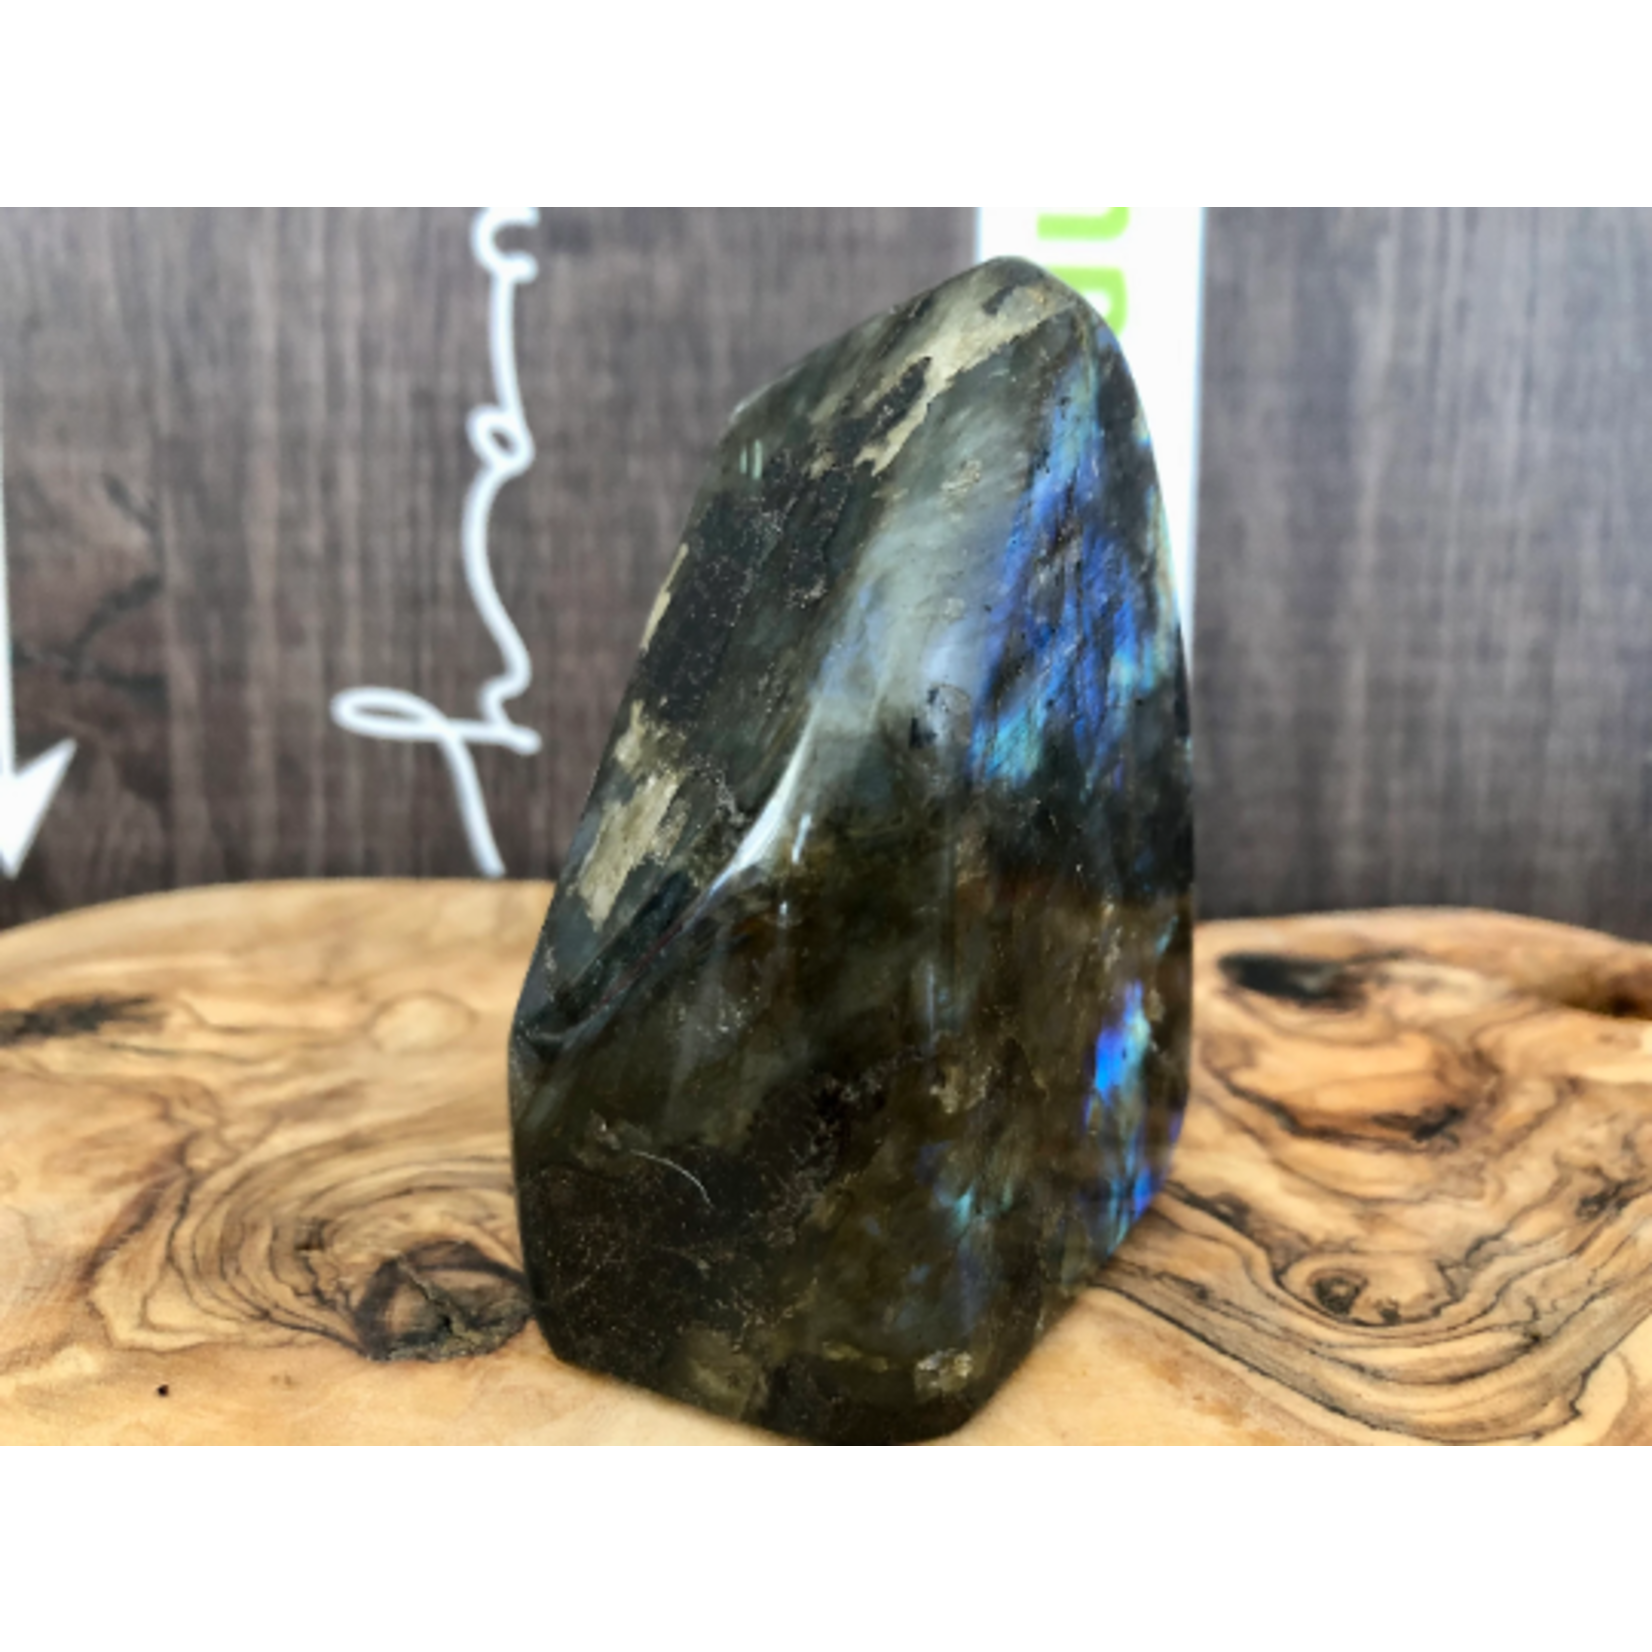 pretty labradorite free form, stimulates the imagination and calms an overactive mind, developing enthusiasm and new ideas